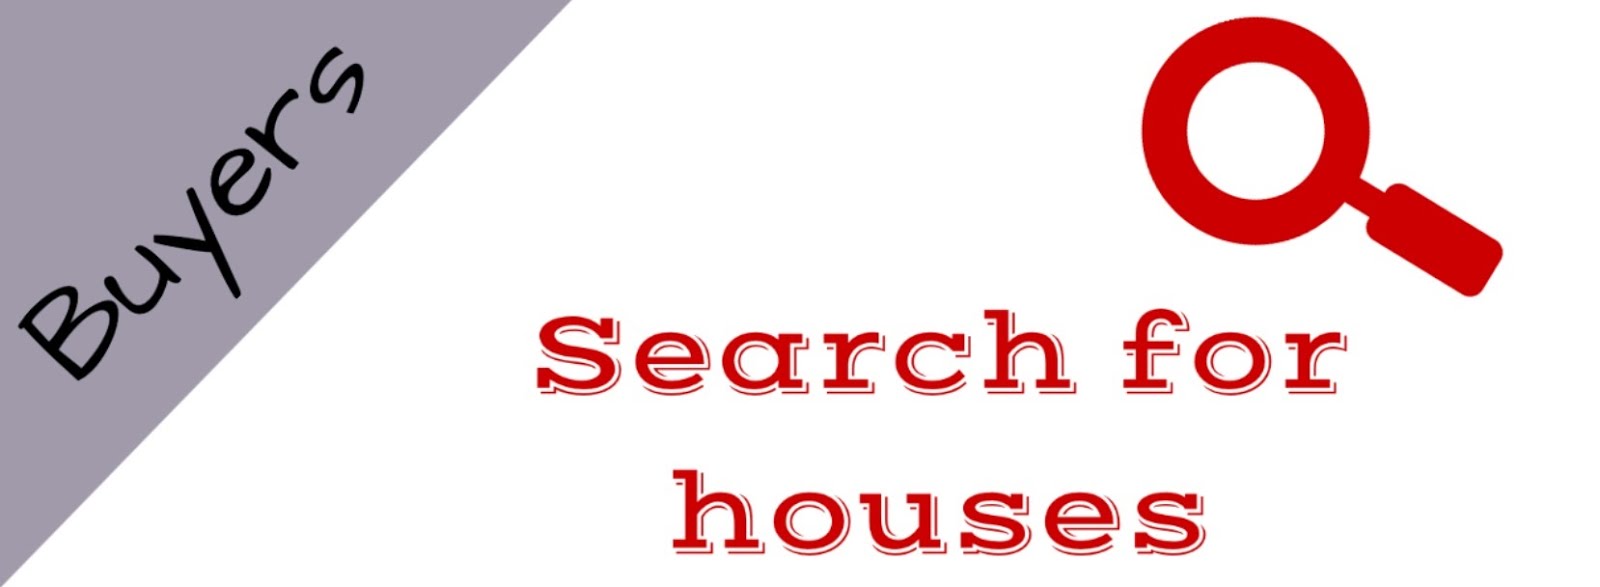 Search for homes for sale